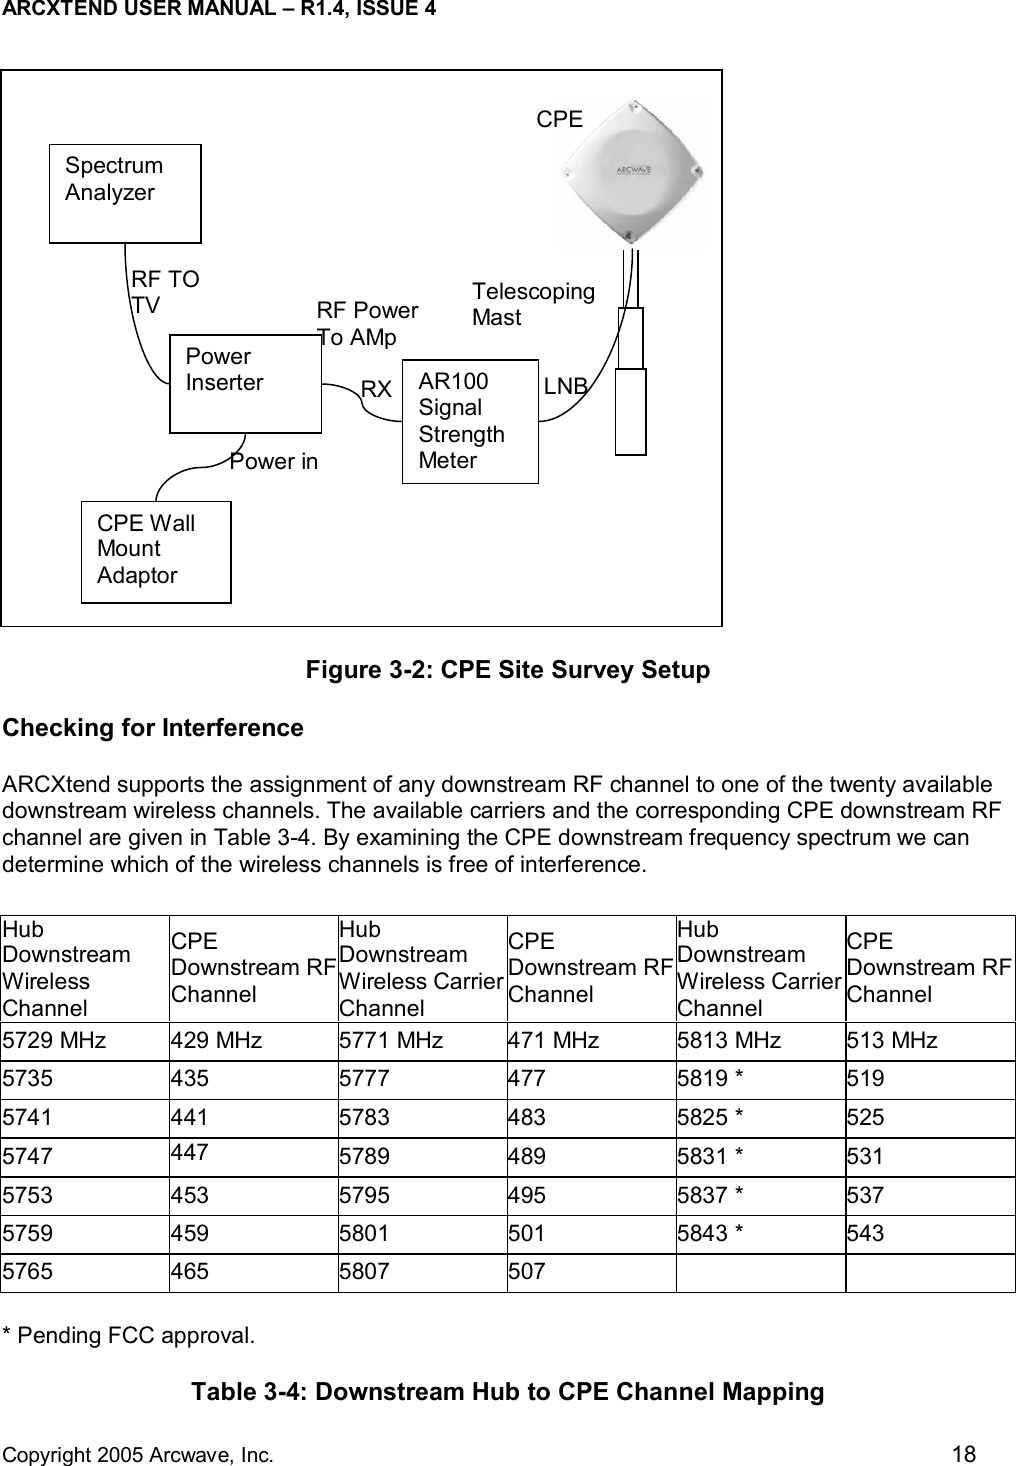 ARCXTEND USER MANUAL – R1.4, ISSUE 4  Copyright 2005 Arcwave, Inc.    18  Figure 3-2: CPE Site Survey Setup Checking for Interference ARCXtend supports the assignment of any downstream RF channel to one of the twenty available downstream wireless channels. The available carriers and the corresponding CPE downstream RF channel are given in Table 3-4. By examining the CPE downstream frequency spectrum we can determine which of the wireless channels is free of interference.   * Pending FCC approval. Table 3-4: Downstream Hub to CPE Channel Mapping Hub  Downstream Wireless Channel   CPE  Downstream RF Channel  Hub  Downstream Wireless Carrier Channel CPE  Downstream RF Channel  Hub Downstream Wireless Carrier Channel CPE Downstream RF Channel  5729 MHz  429 MHz  5771 MHz  471 MHz  5813 MHz  513 MHz 5735  435  5777   477   5819 *  519 5741 441  5783 483  5825 * 525 5747  447  5789   489   5831 *  531 5753 453  5795 495  5837 * 537 5759 459  5801 501  5843 * 543 5765   465   5807  507     Telescoping Mast CPE LNBCPE Wall Mount Adaptor AR100 Signal Strength Meter RXPower Inserter Spectrum Analyzer RF Power To AMpRF TO TV Power in 